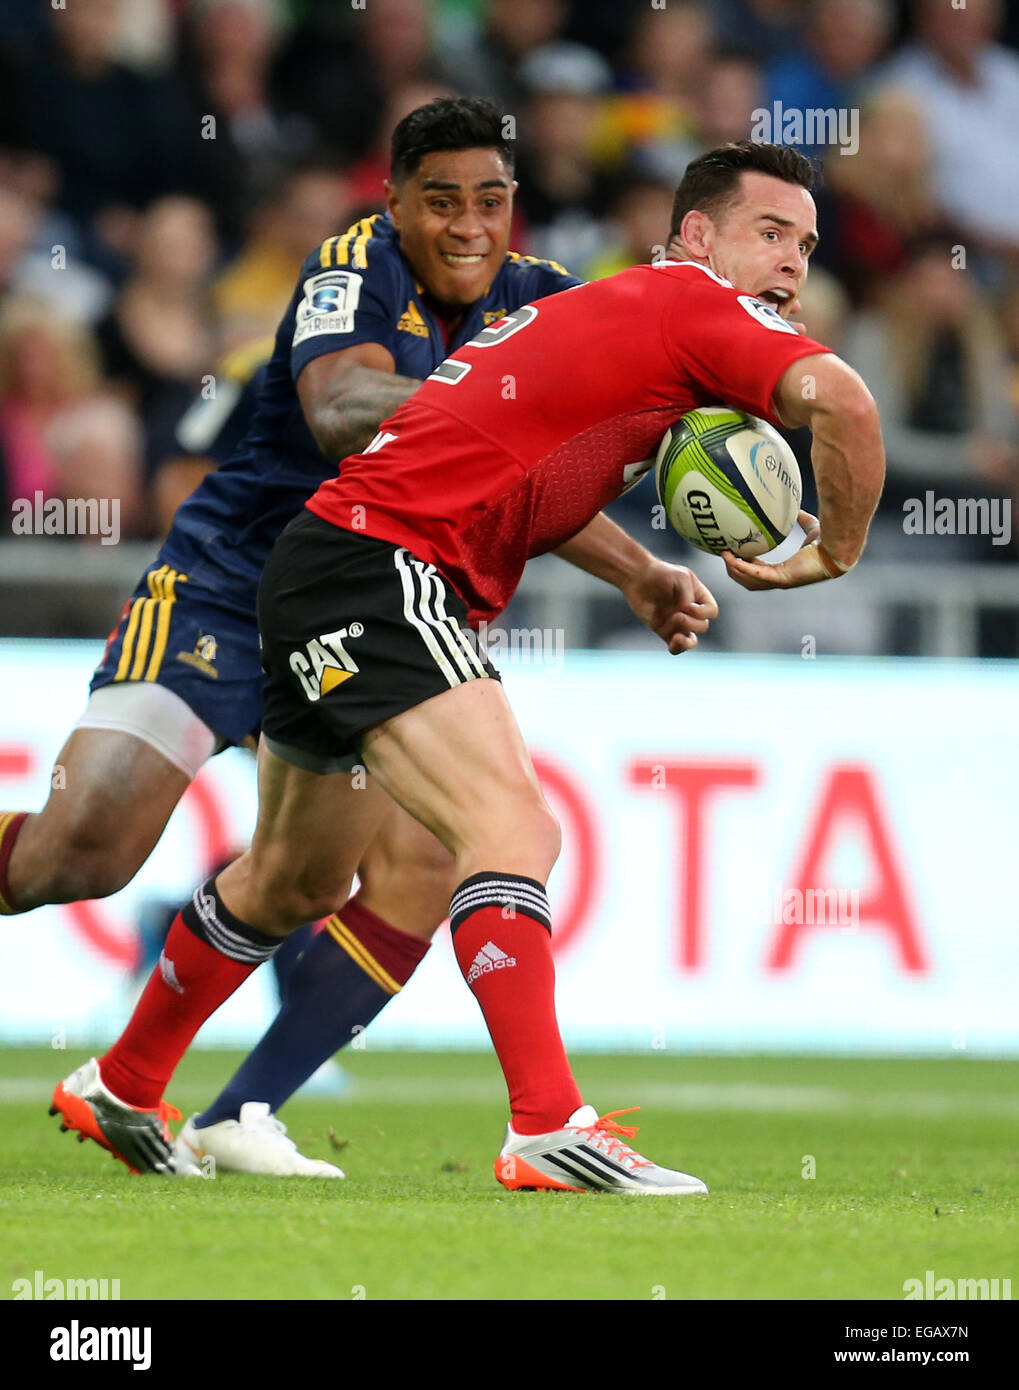 Dunedin, New Zealand. 21st Feb, 2015. Ryan Crotty of the Crusaders, right, in the tackle of Malakai Fekitoa of the Highlanders during the Super 15 rugby match between the Highlanders and the Crusaders at Forsyth Barr Stadium, Dunedin, Saturday, February 21, 2015. Credit:  Action Plus Sports/Alamy Live News Stock Photo